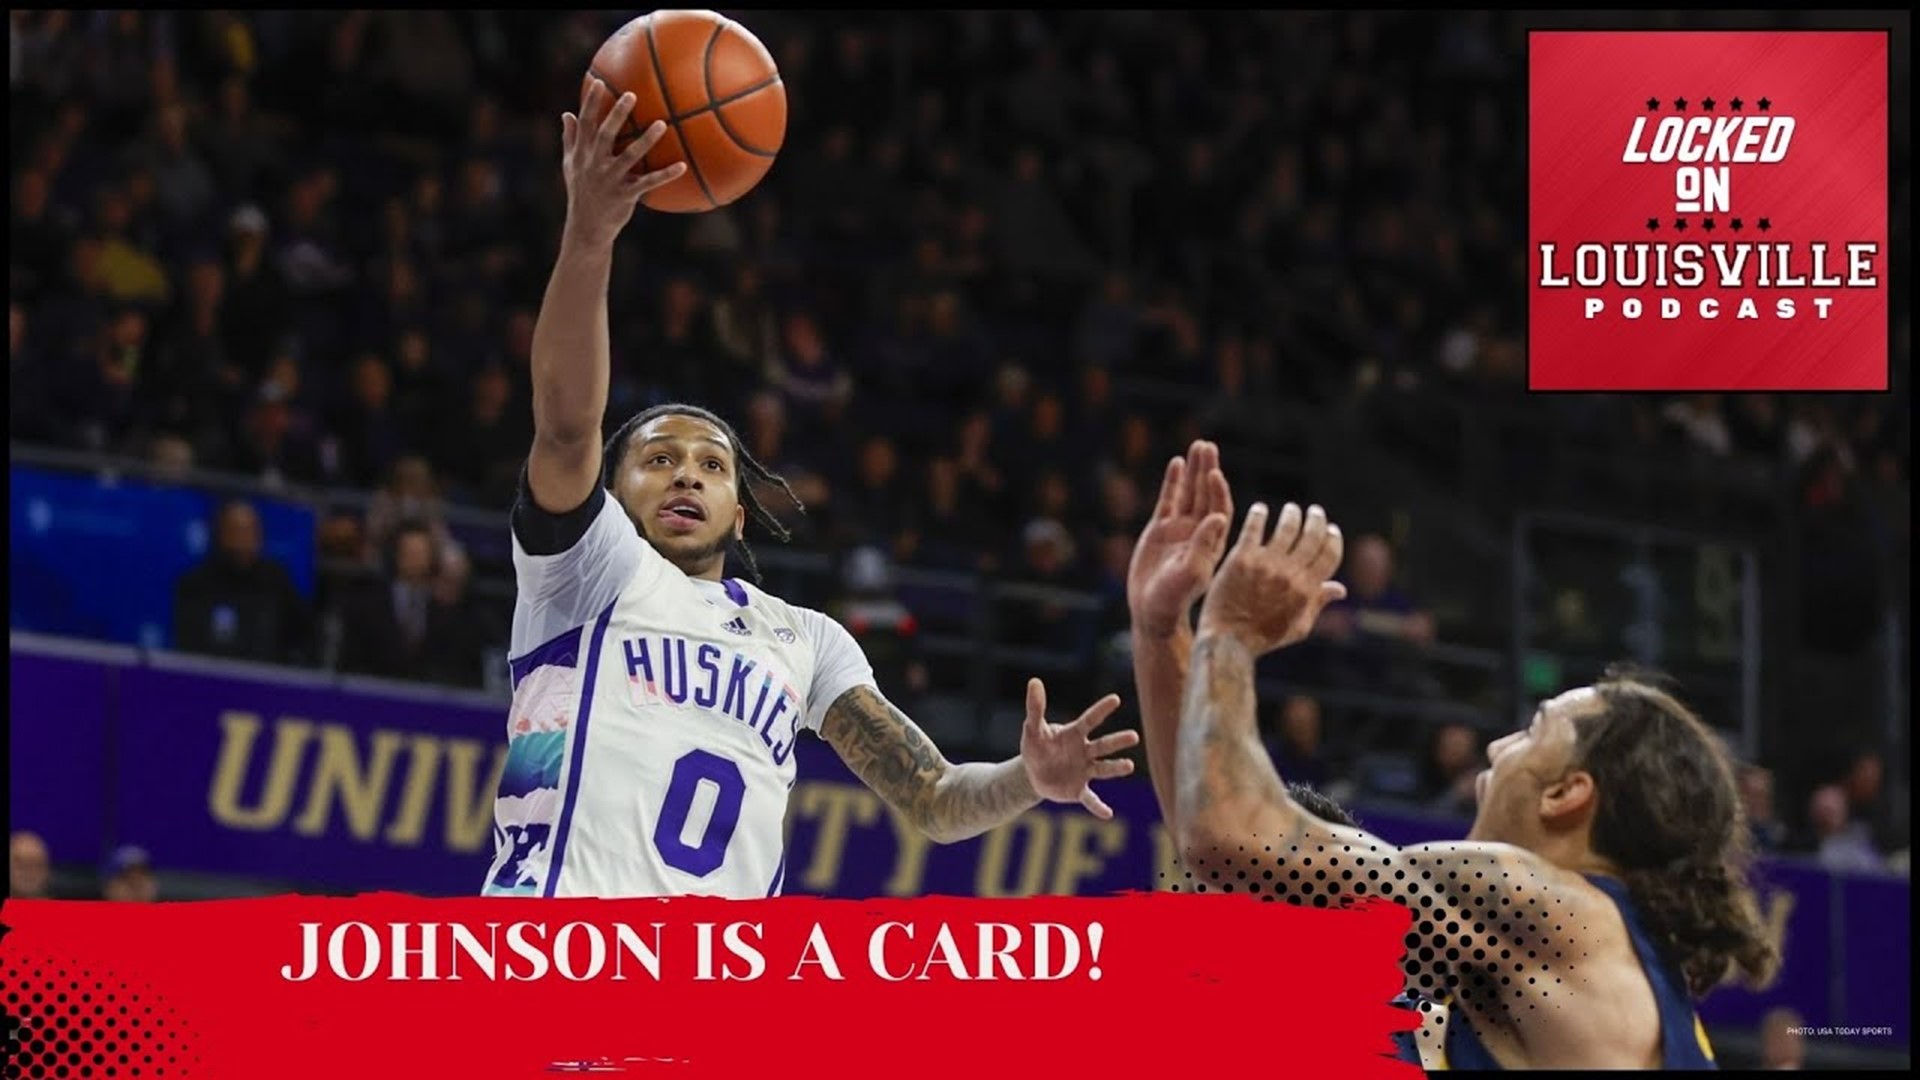 Washington transfer & PAC12 6MOY Koren Johnson has committed to the Louisville Cardinals!